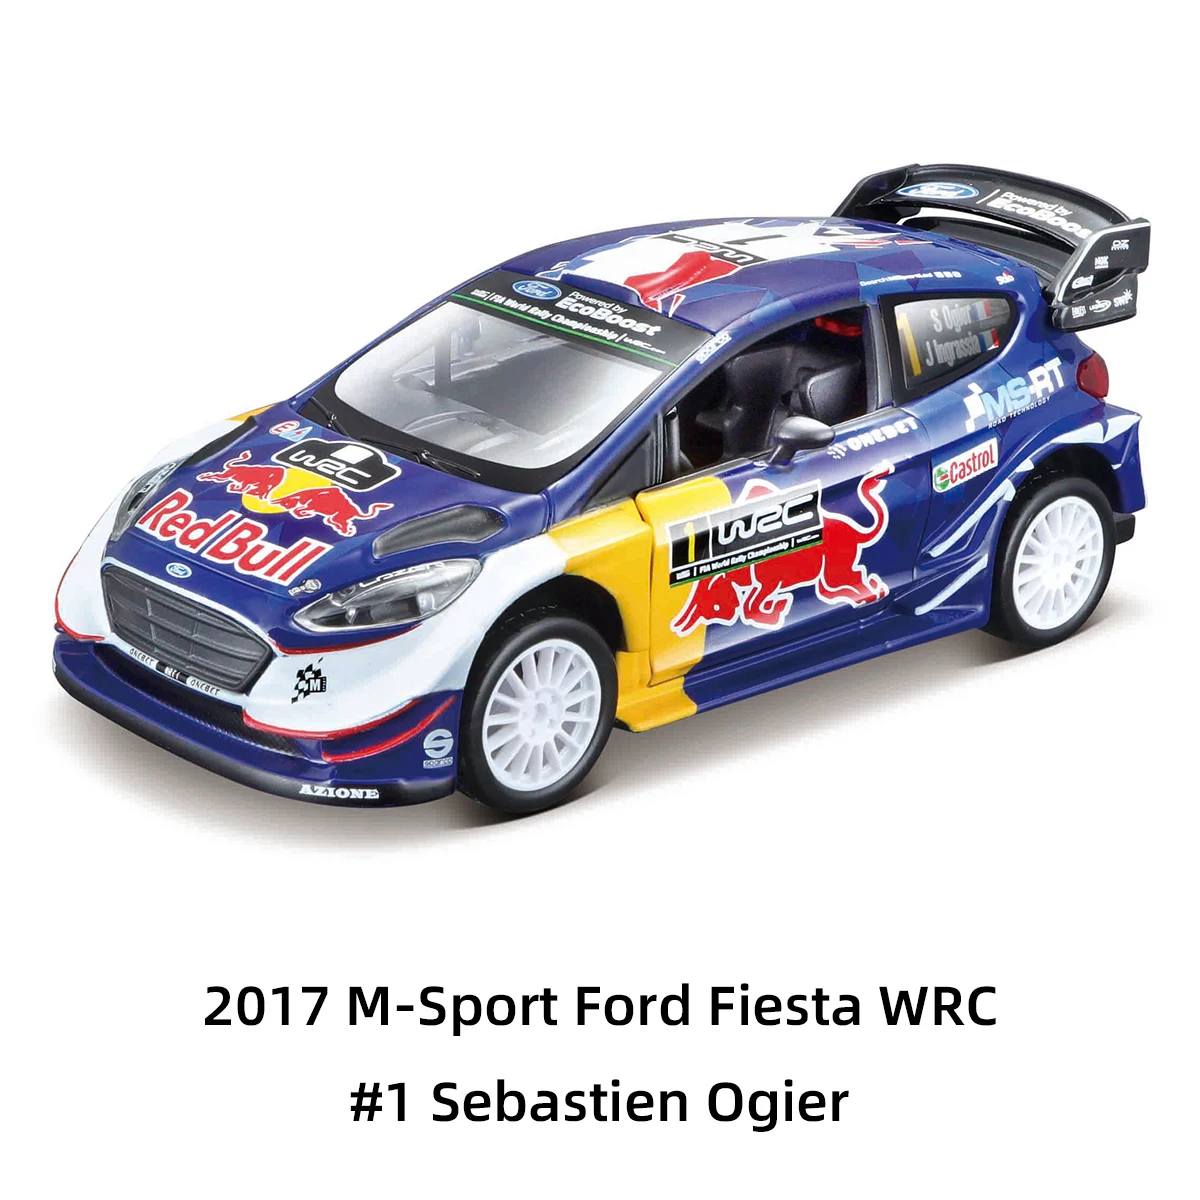 Bburago 1:32 2017 M-Sport Ford Fiesta WRC Static Die Cast Vehicles Collectible Model Car Toys